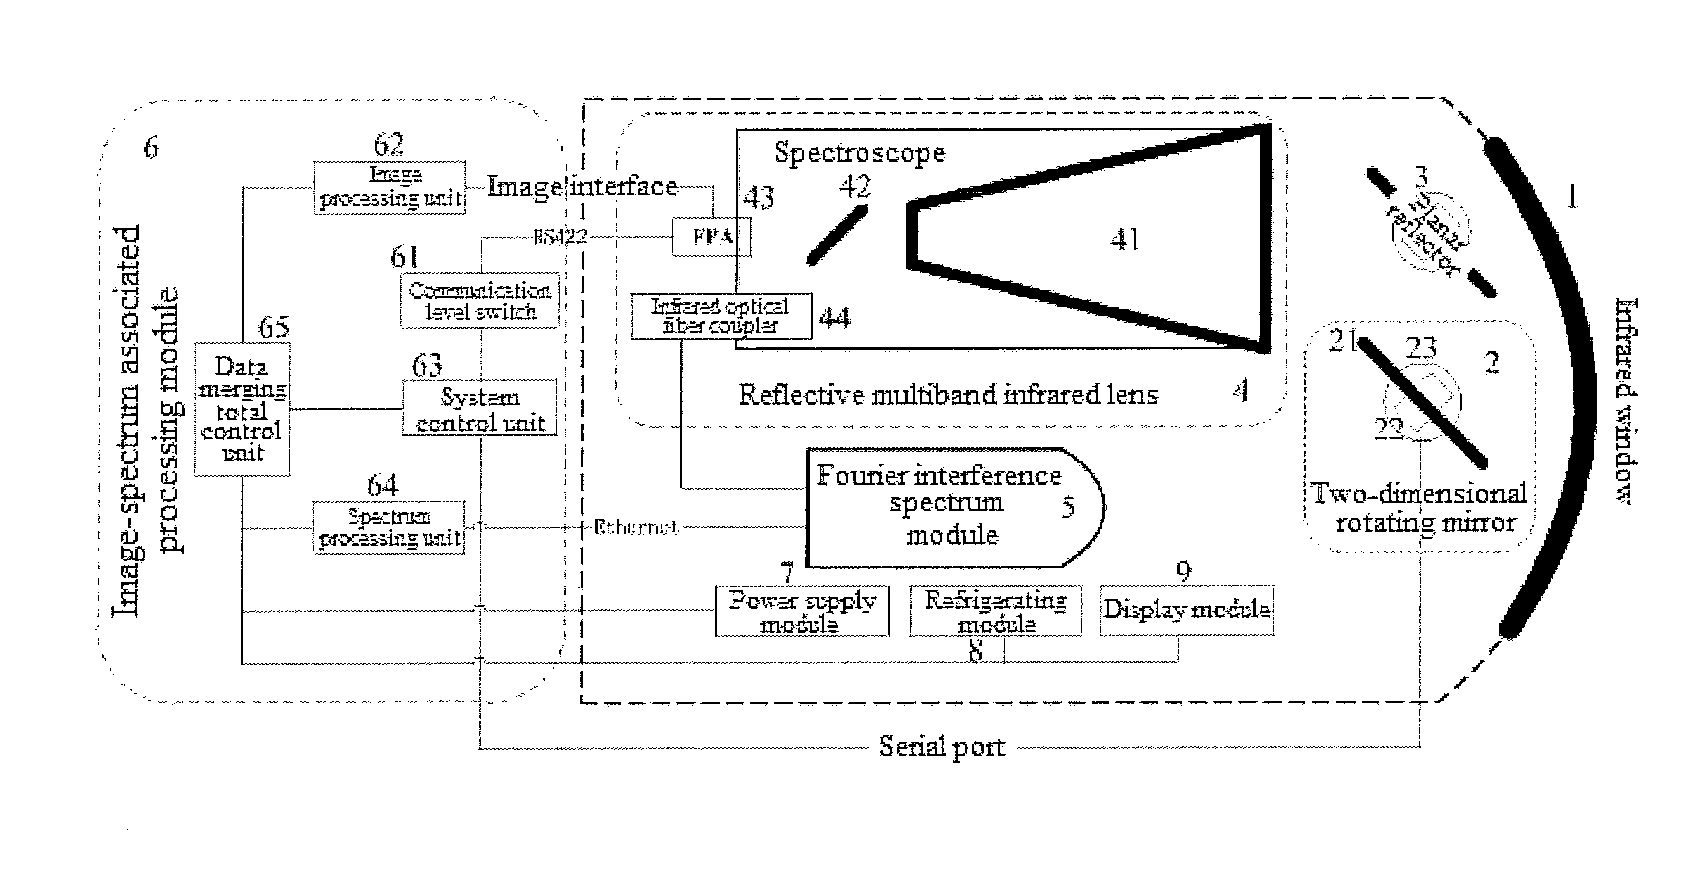 Multiband common-optical-path image-spectrum associated remote sensing measurement system and method